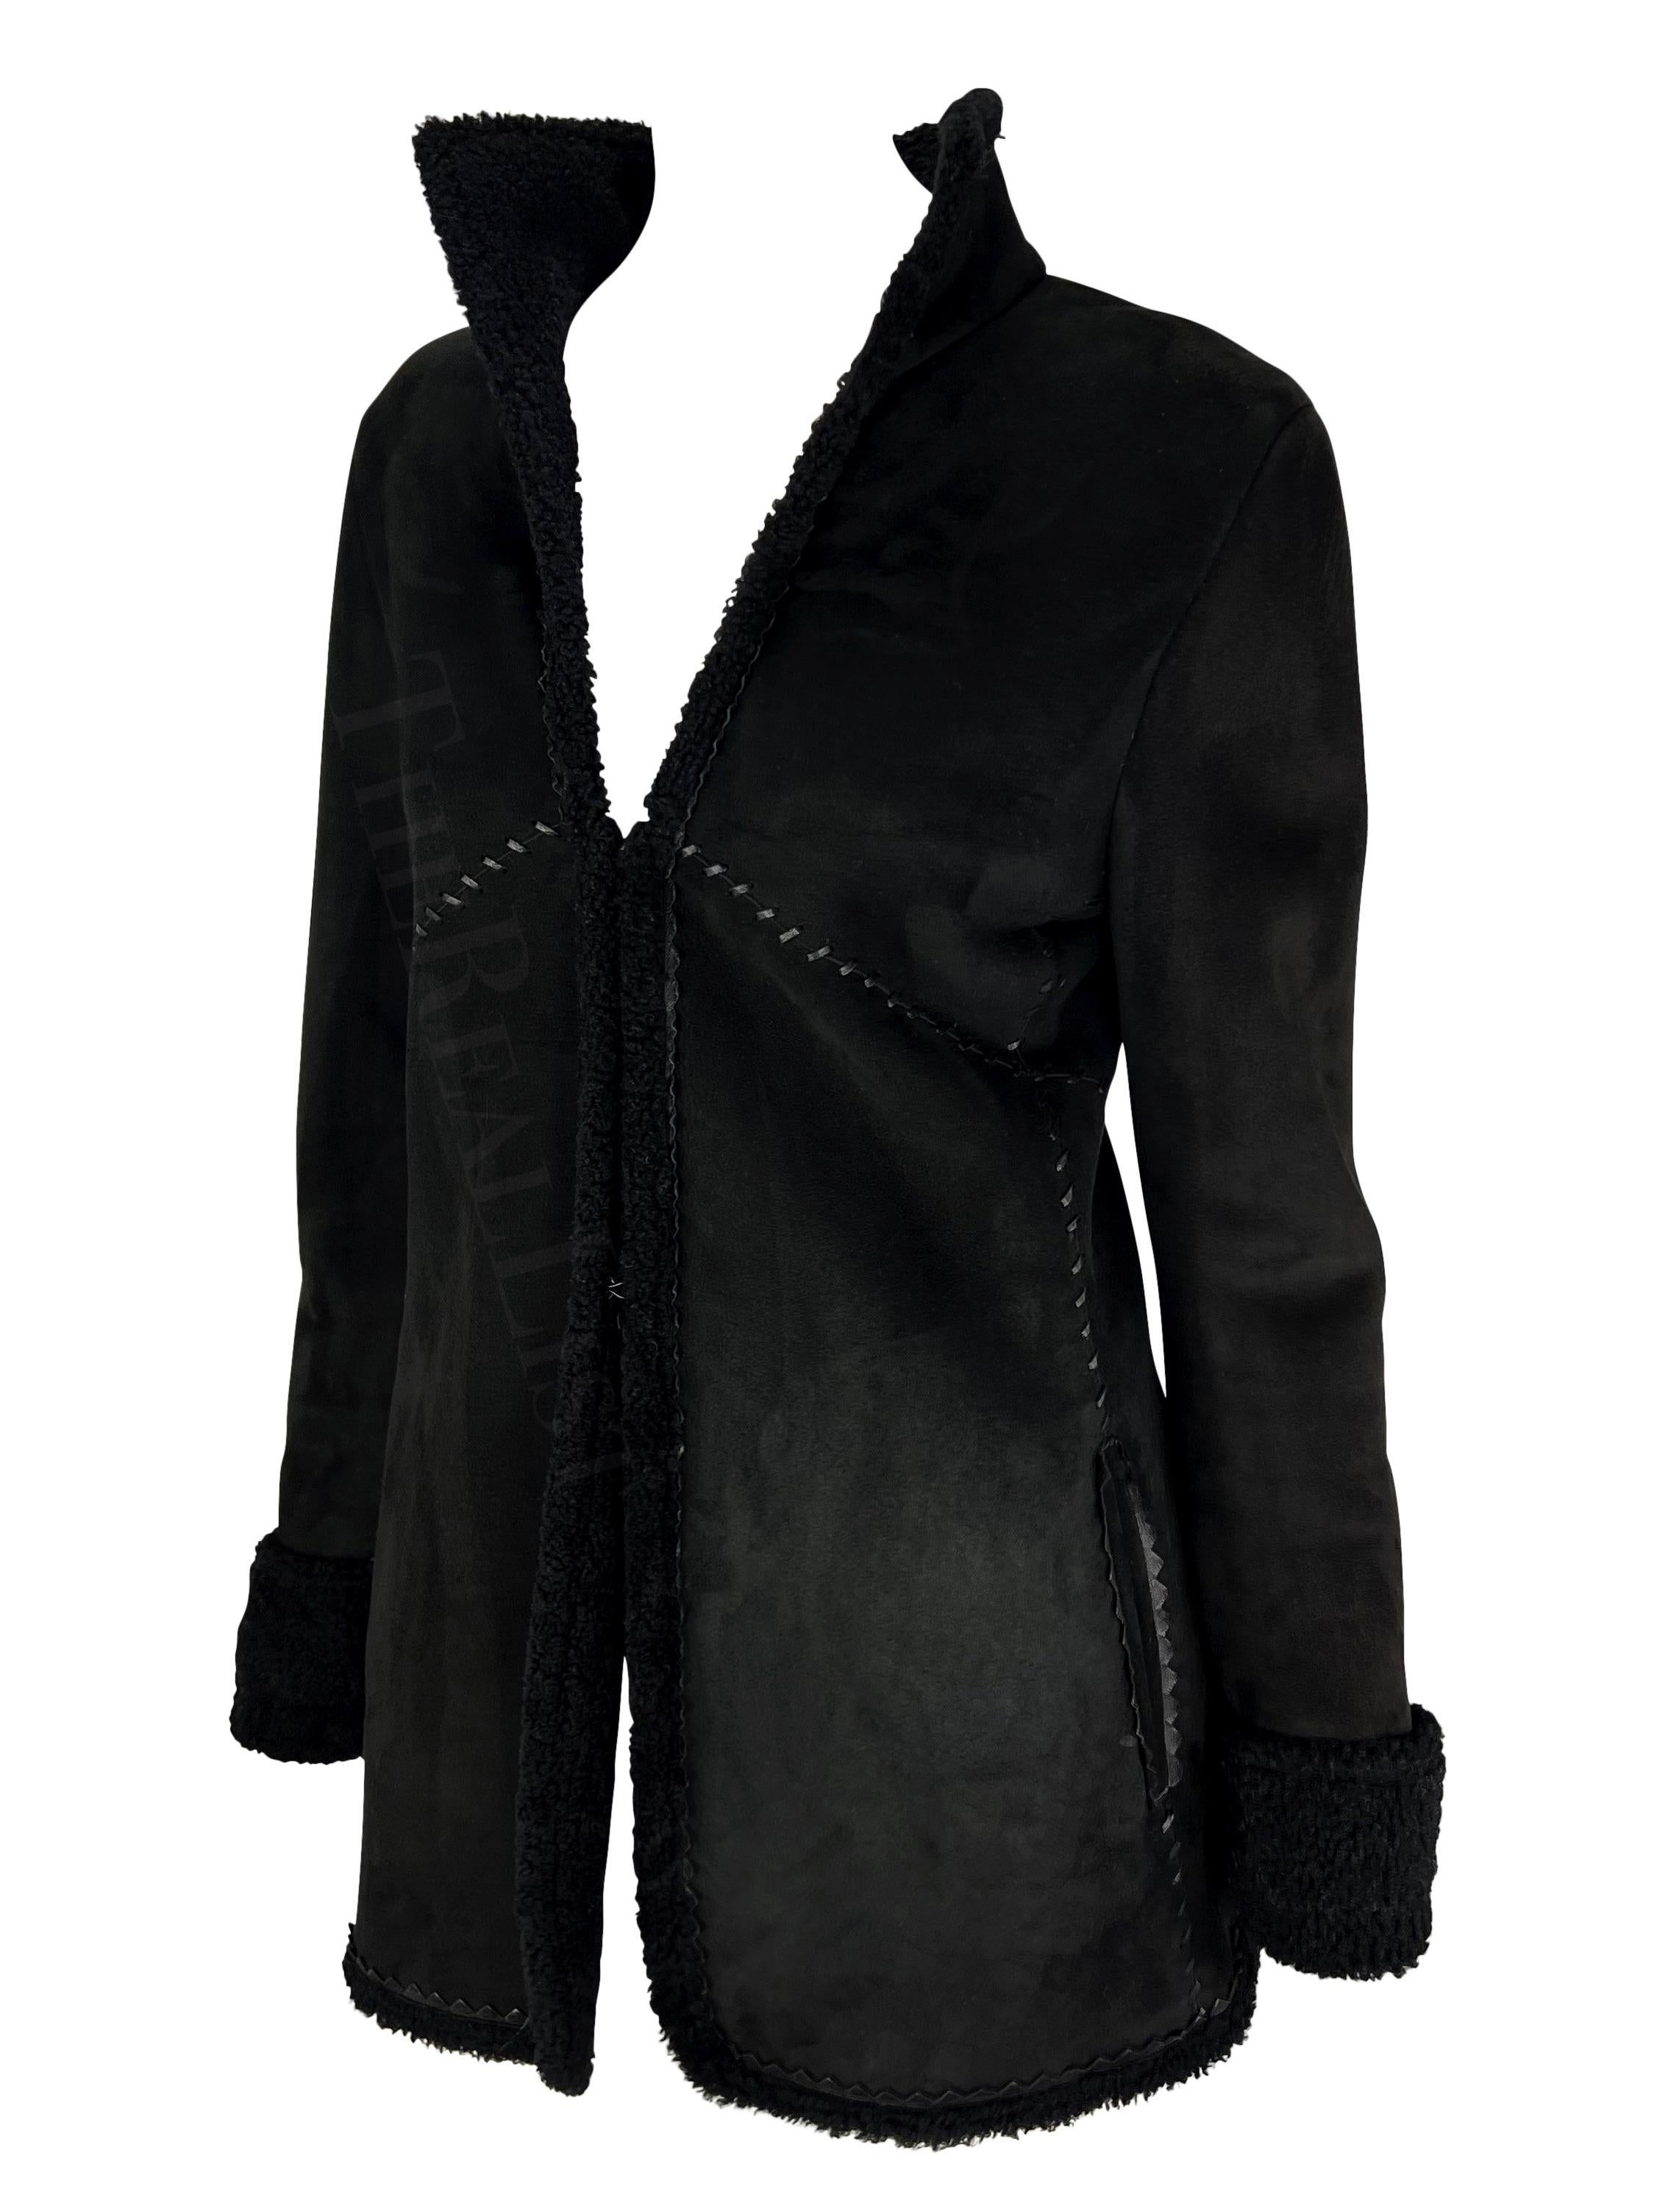 Presenting a black shearling Gianni Versace coat, designed by Donatella Versace. From the Fall/Winter 2002 collection, this coat features a suede exterior with a shearling interior. The shearling fur can be folded over at the cuffs and peaks through